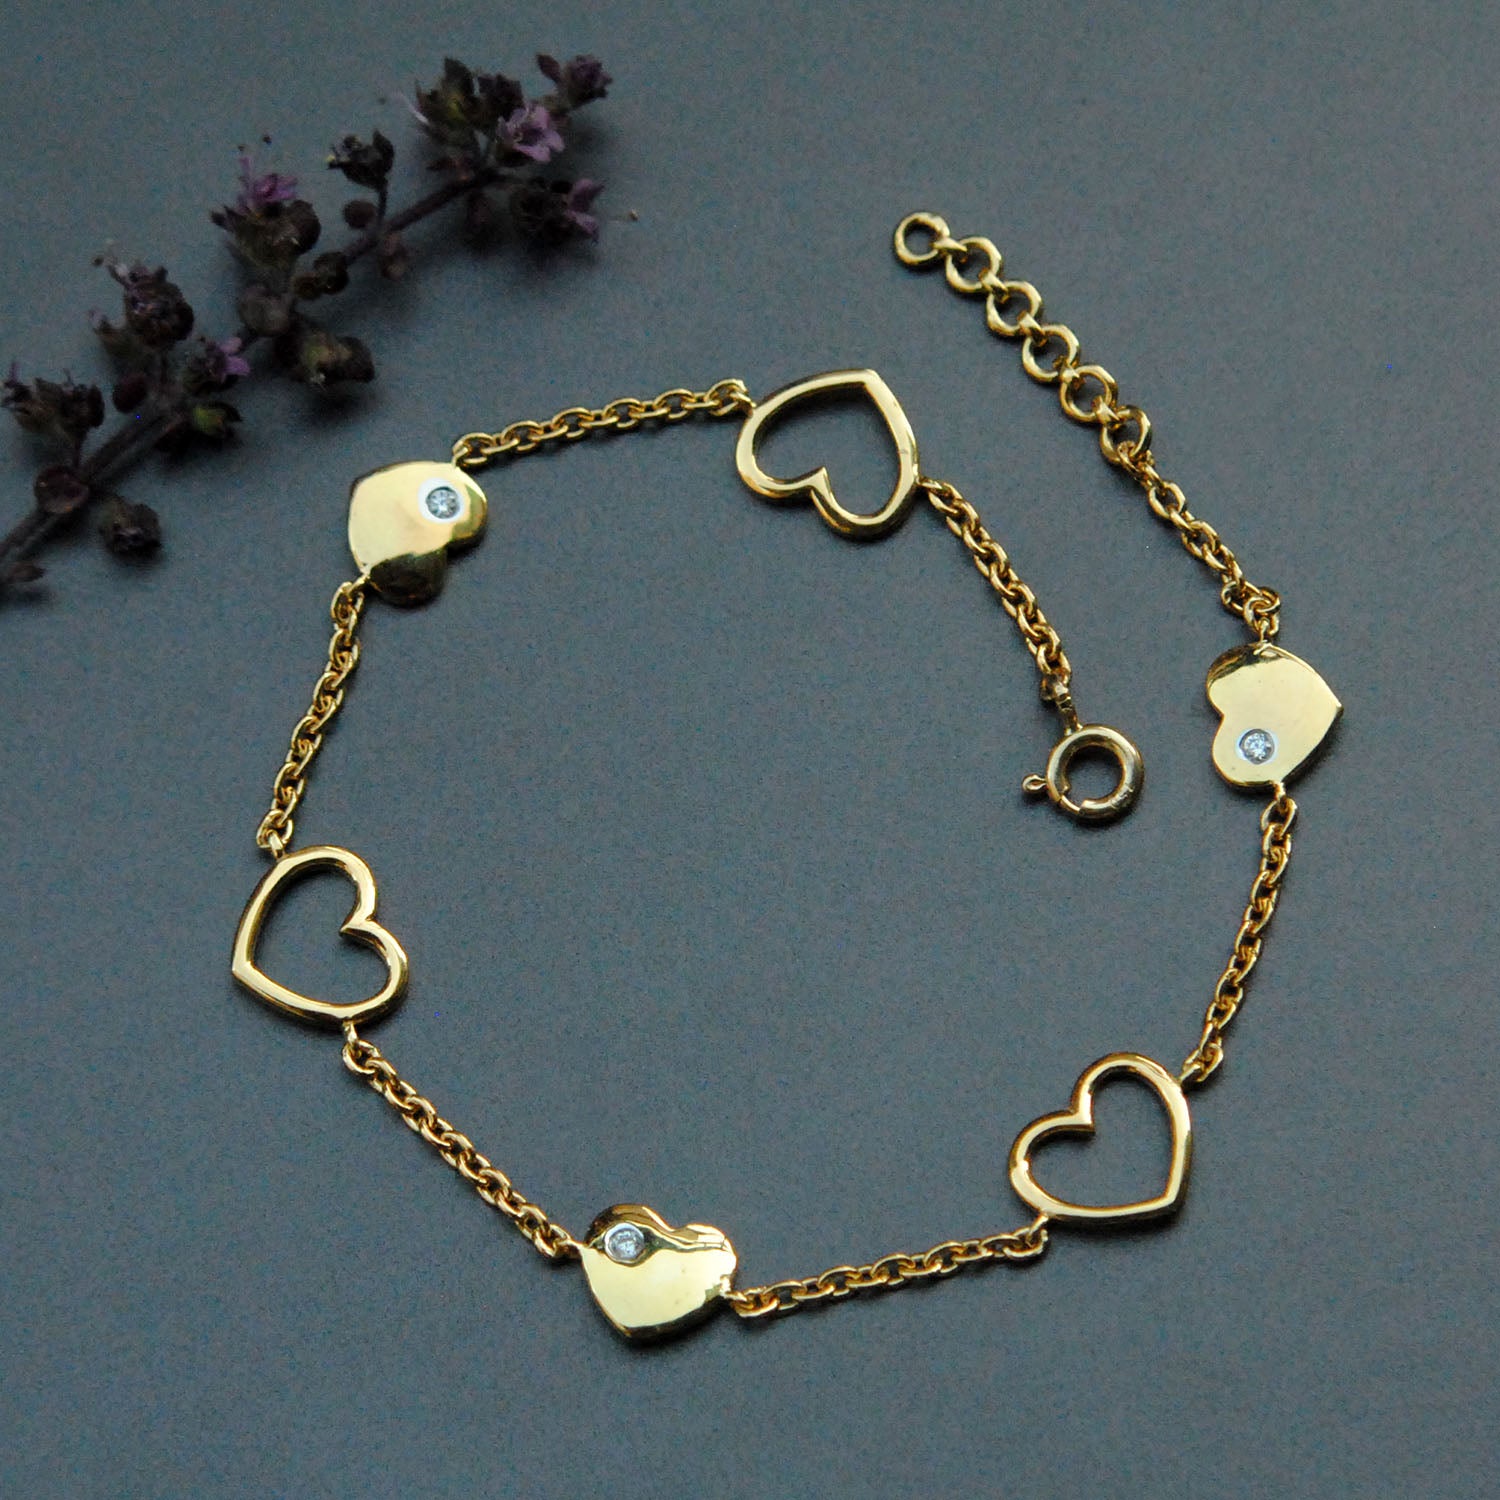 Charm Bracelet with Heart Dharms and Diamond